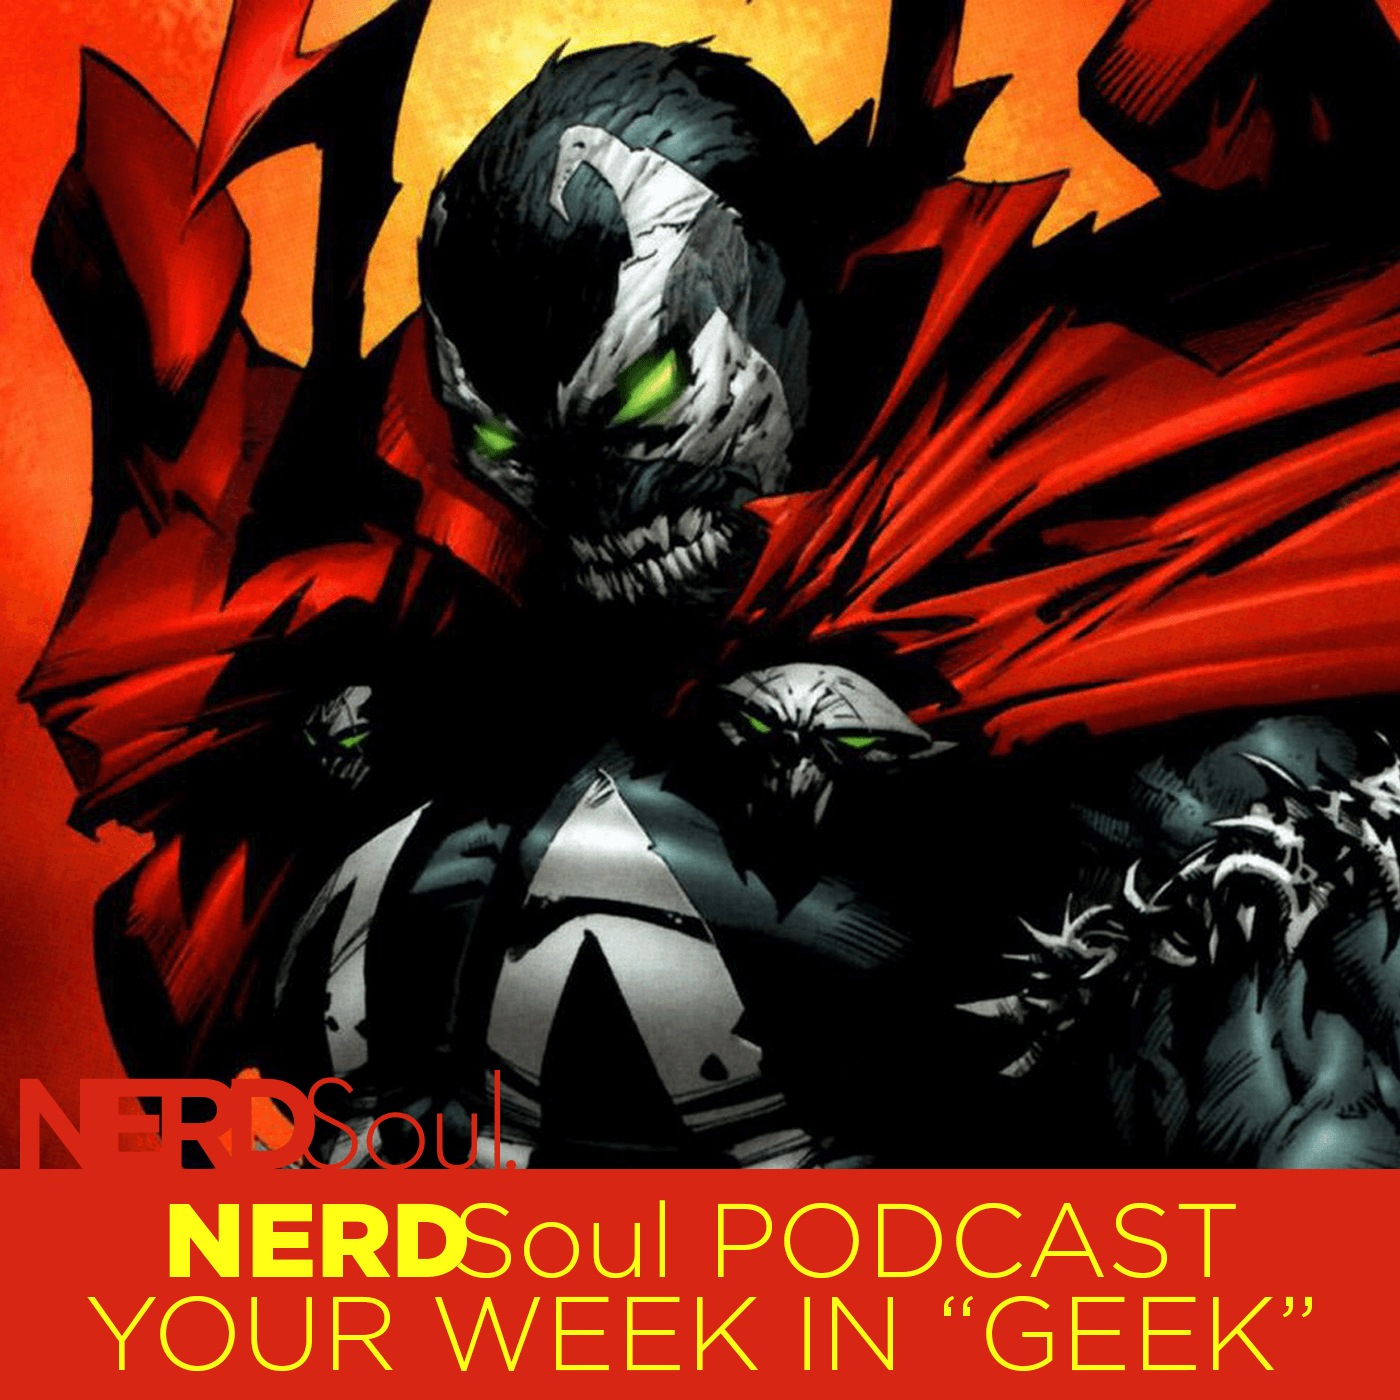 Todd McFarlane & Jamie Foxx Combine For Spawn Reboot, The Death of Superman, Star Wars Darth Vader: Dark Lord of the Sith & More! | NERDSoul • Your Week in Geek